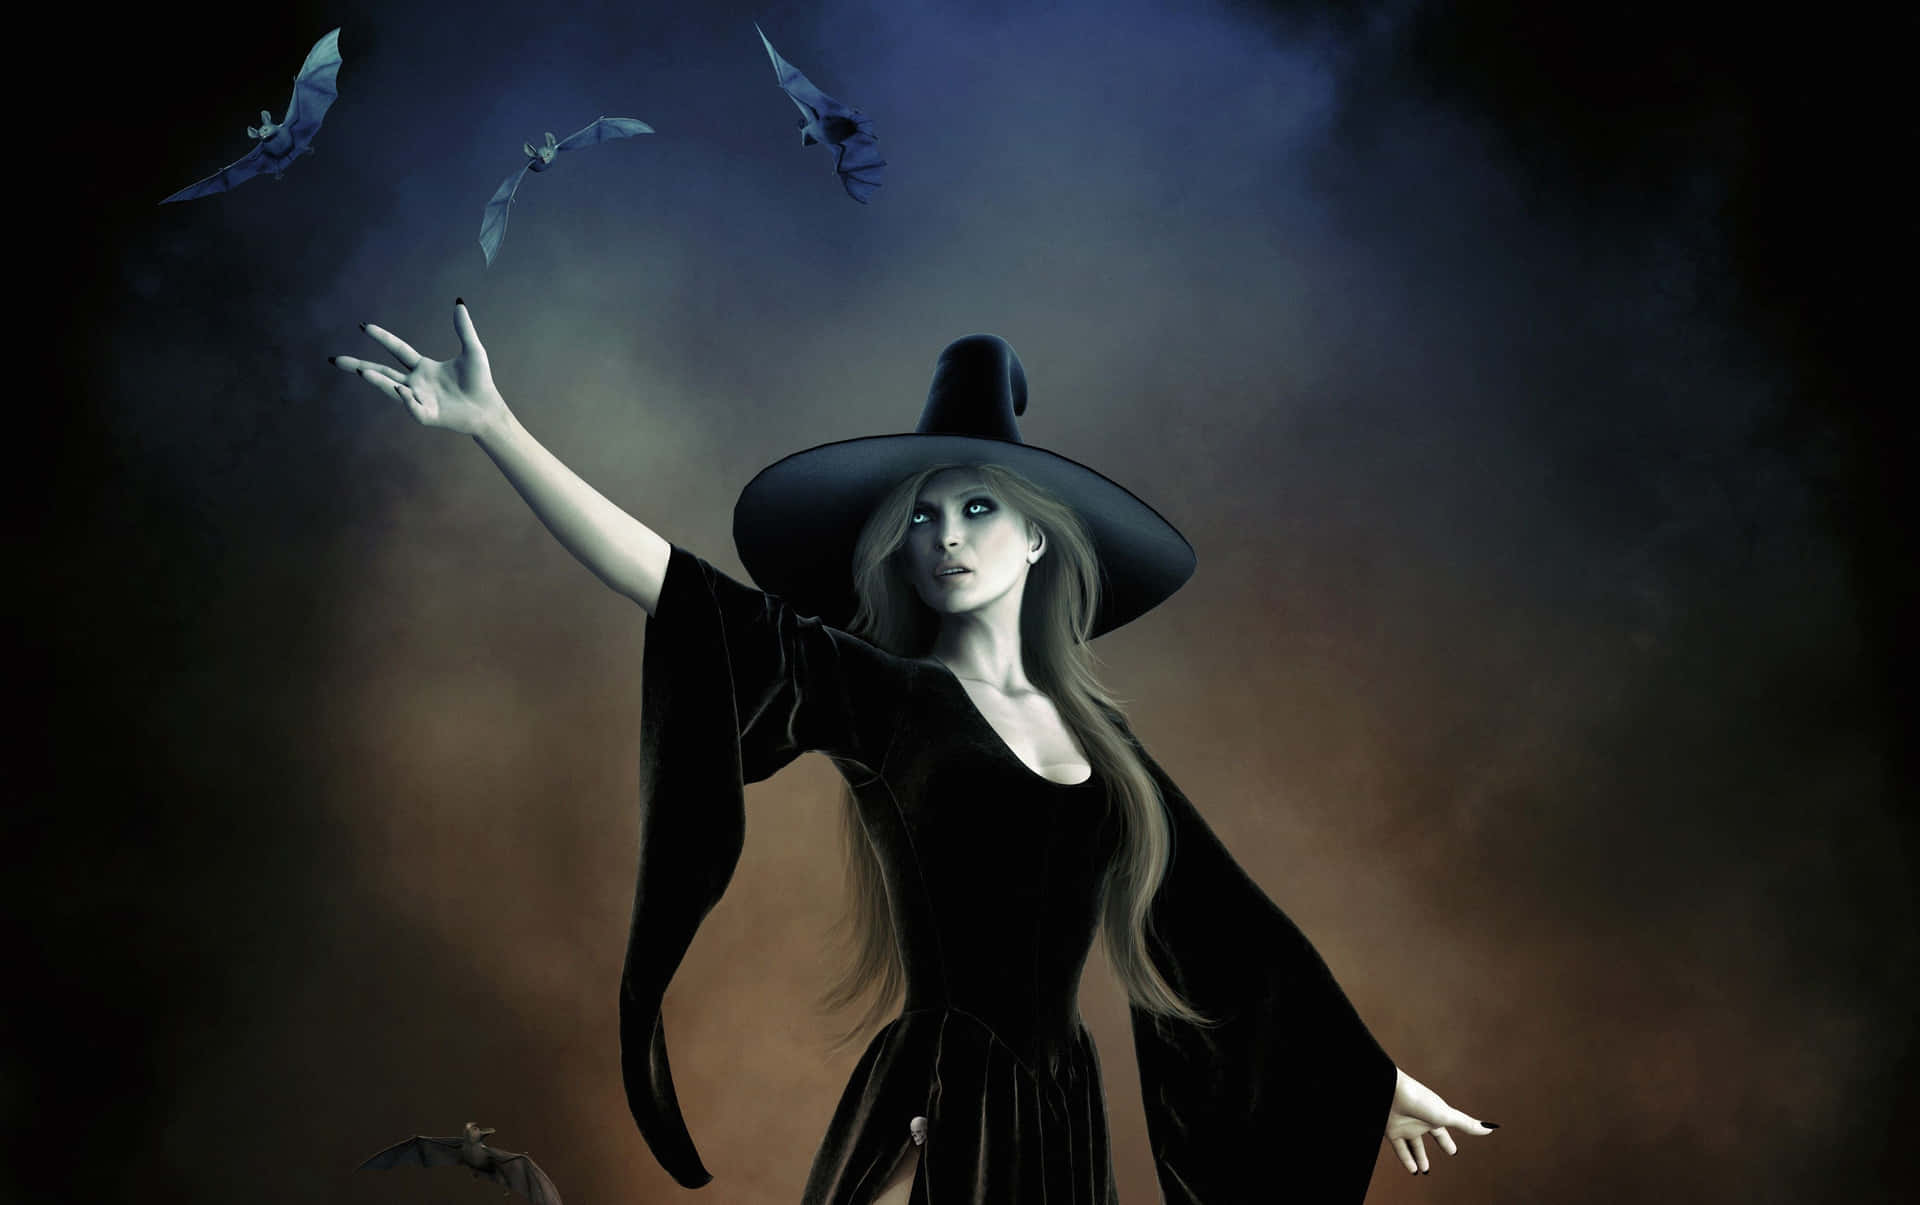 An ominous witch stands in an eerie forest, cloaked in darkness.